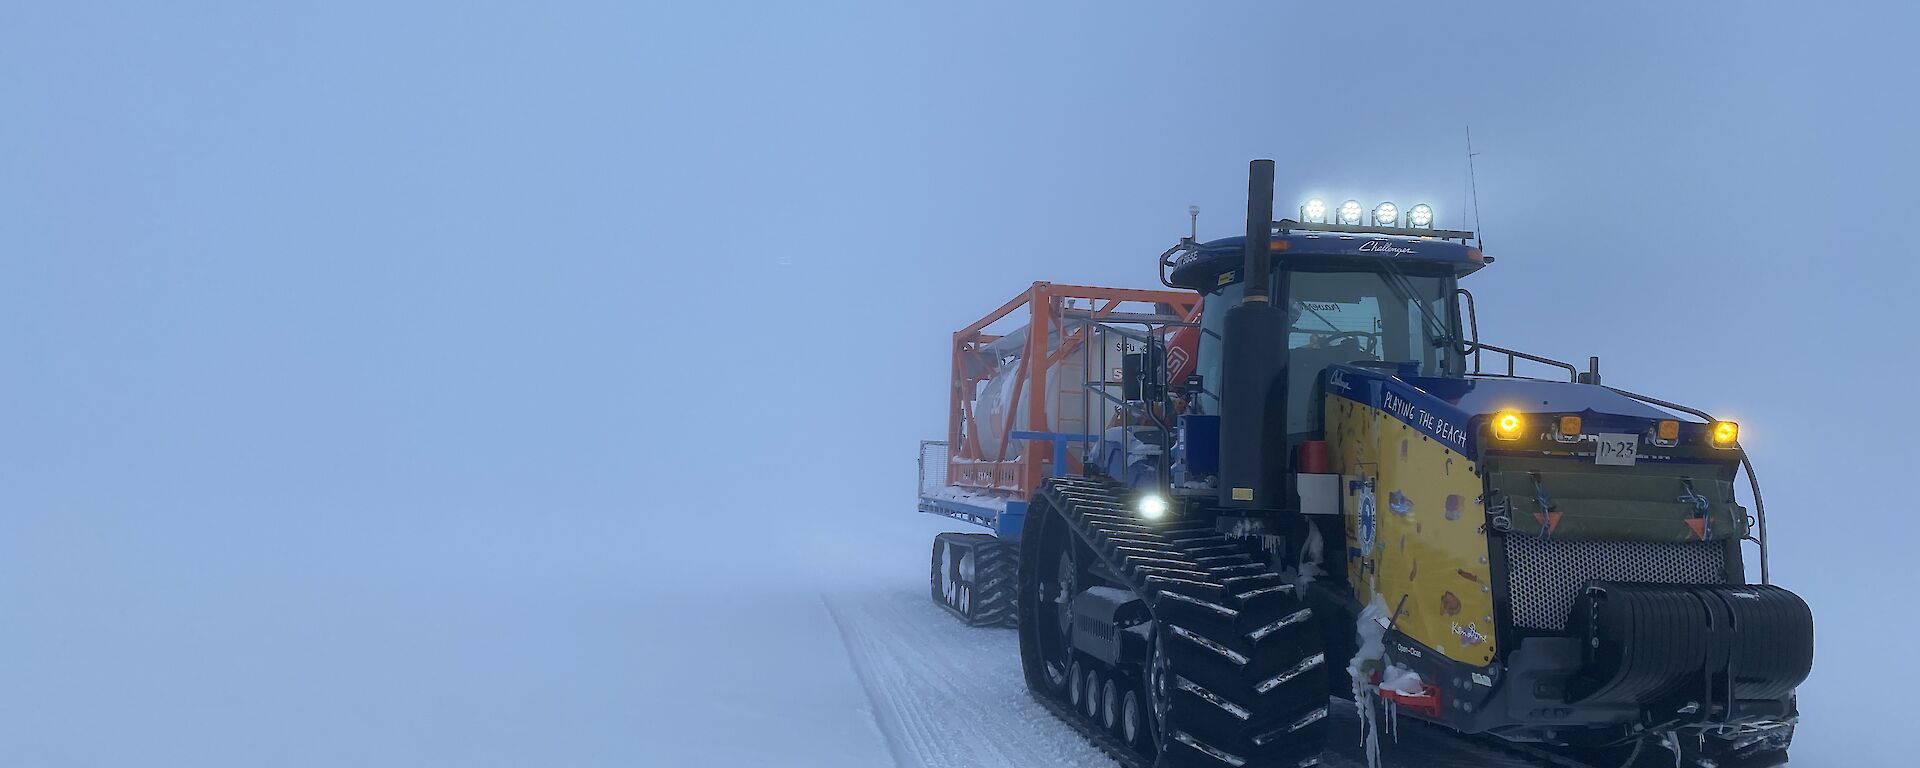 A Challenger tractor towing a flatbed. The cloudy sky appears to merge seamlessly with the snowy ground